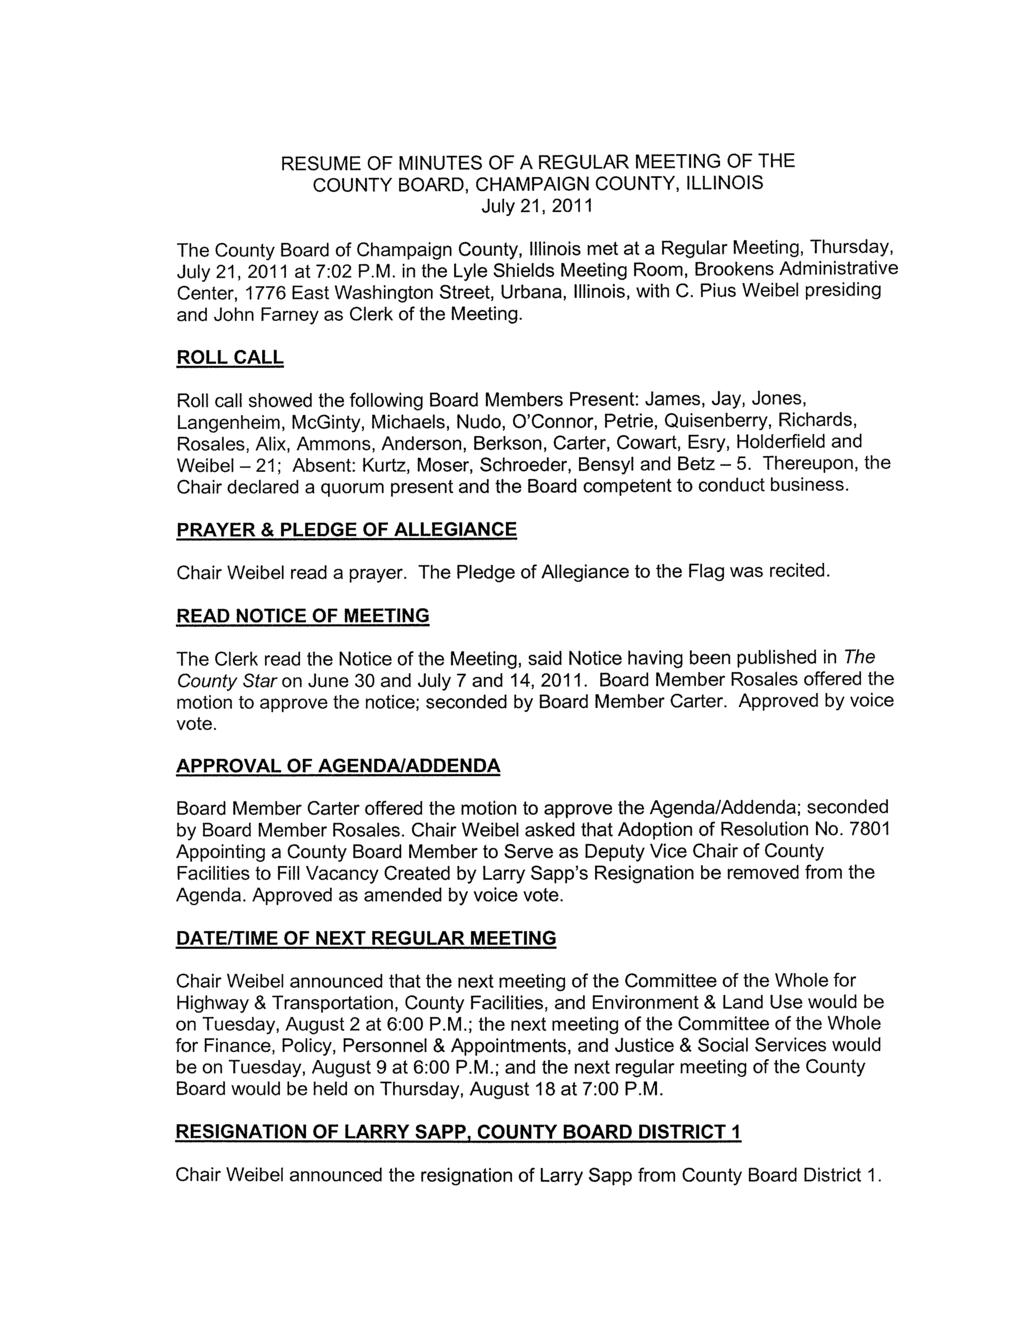 RESUME OF MINUTES OF A REGULAR MEETING OF THE COUNTY BOARD, CHAMPAIGN COUNTY, ILLINOIS July 21, 2011 The County Board of Champaign County, Illinois met at a Regular Meeting, Thursday, July 21, 2011